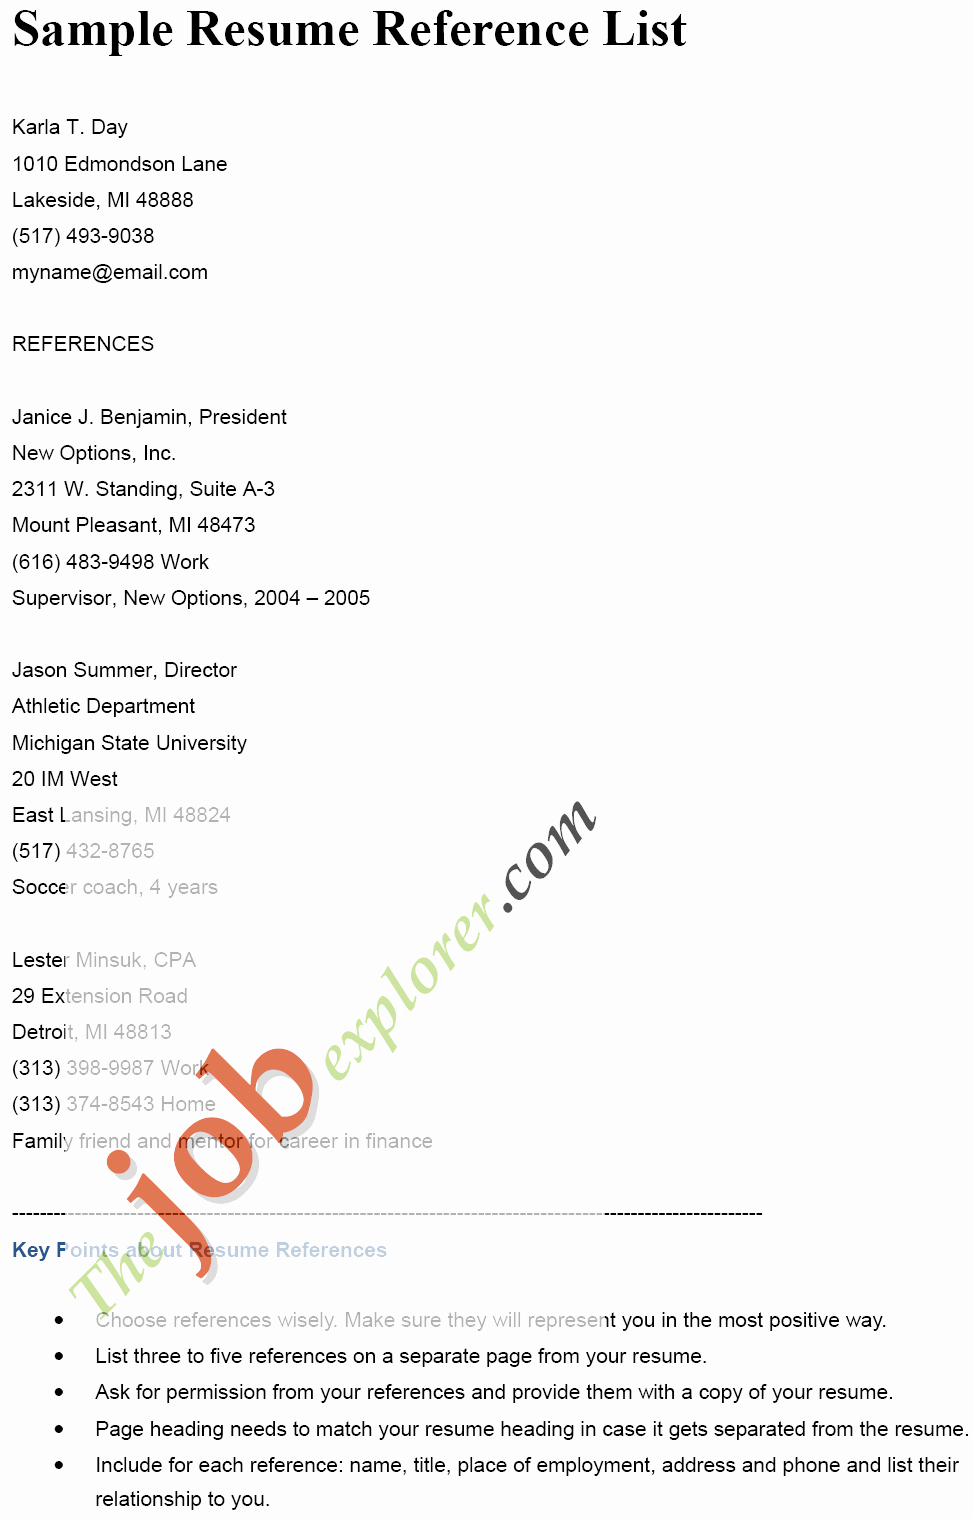 Listing References On A Resume Inspirational Copy A Professional Reference List – Perfect Resume format